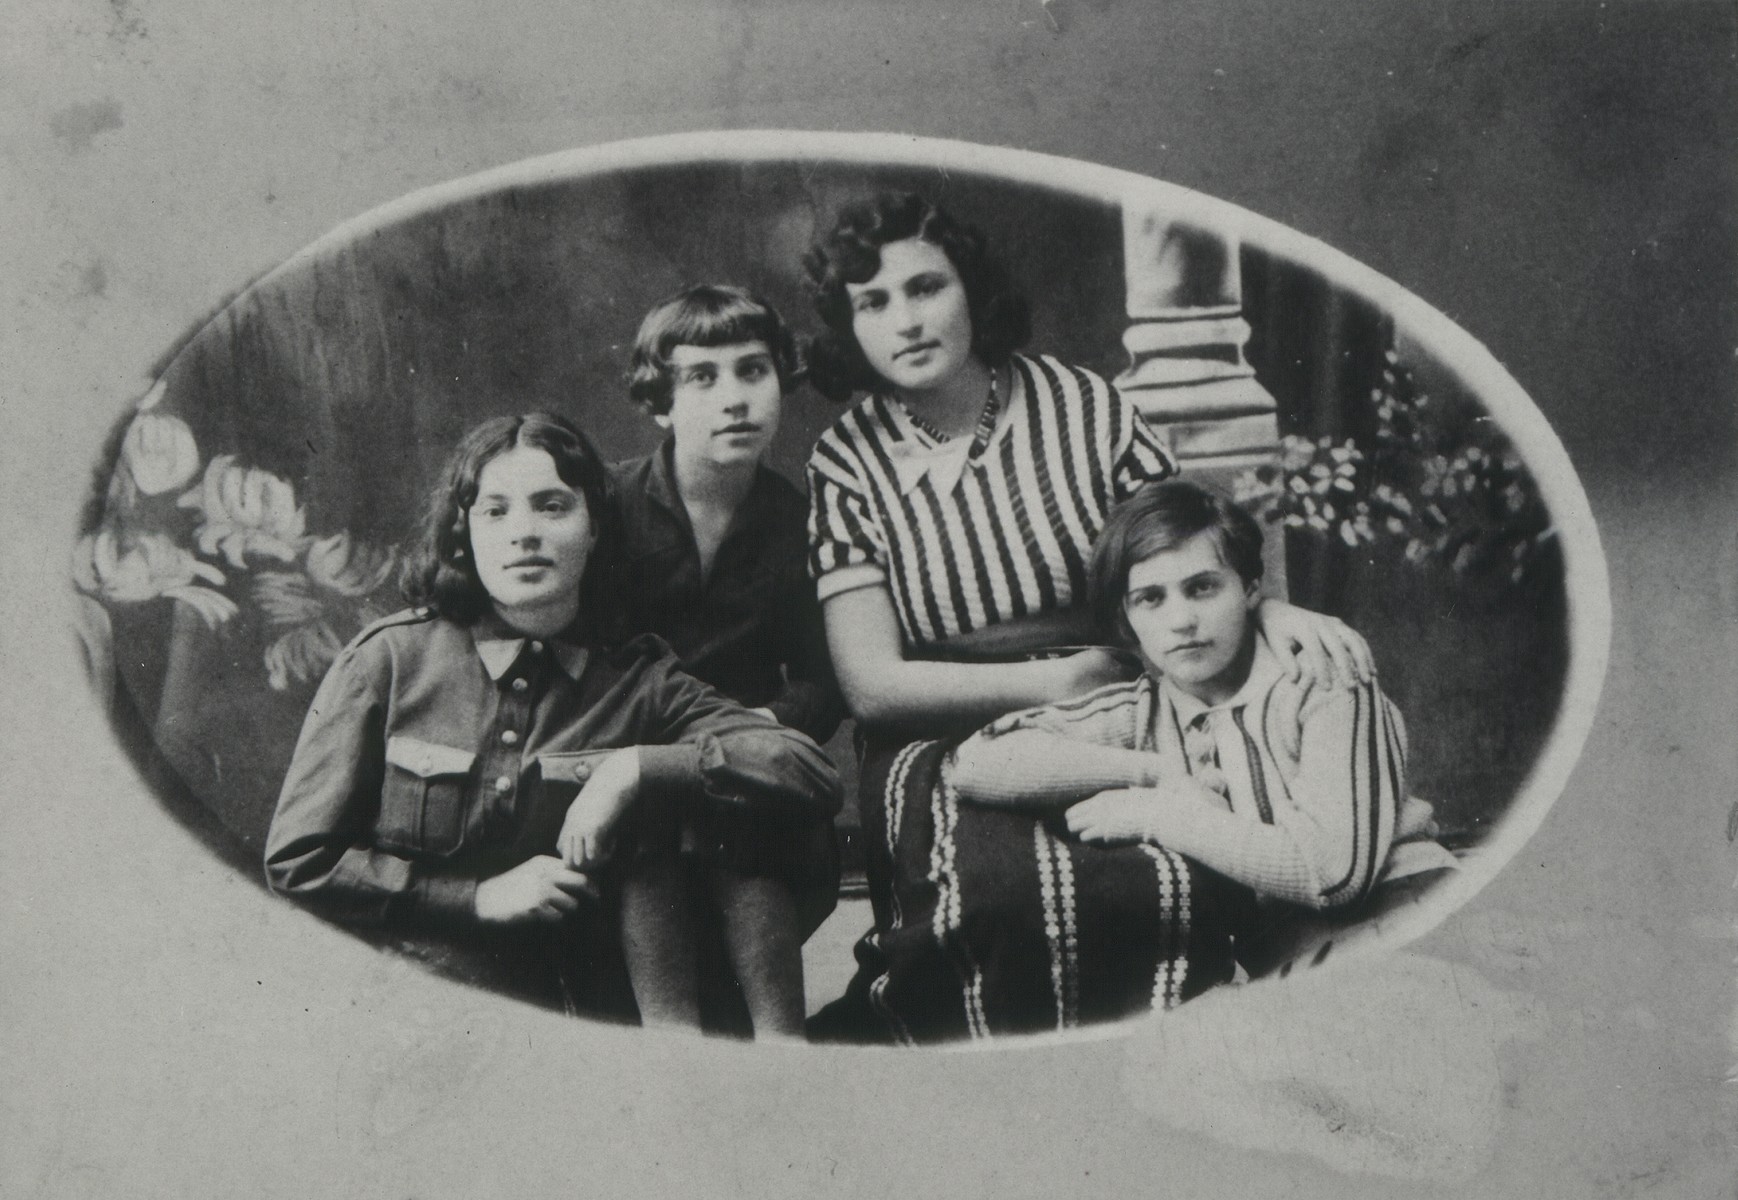 Studio portrait of the Edelstein family.

Top row, right to left: two cousins, Freedah Edelstein and Liebaleh Belicki; leaning on her cousin Rochella Belicki, and sitting on the left is Batsheva Edelstein, a sister of Freedah. Freedah was born in 1911. She, her husband, and children were murdered in the September 1941 massacre in Eisiskes.  The other three girls were also murdered during the Holocaust. Bat-Shevah was murdered with her fiancee.